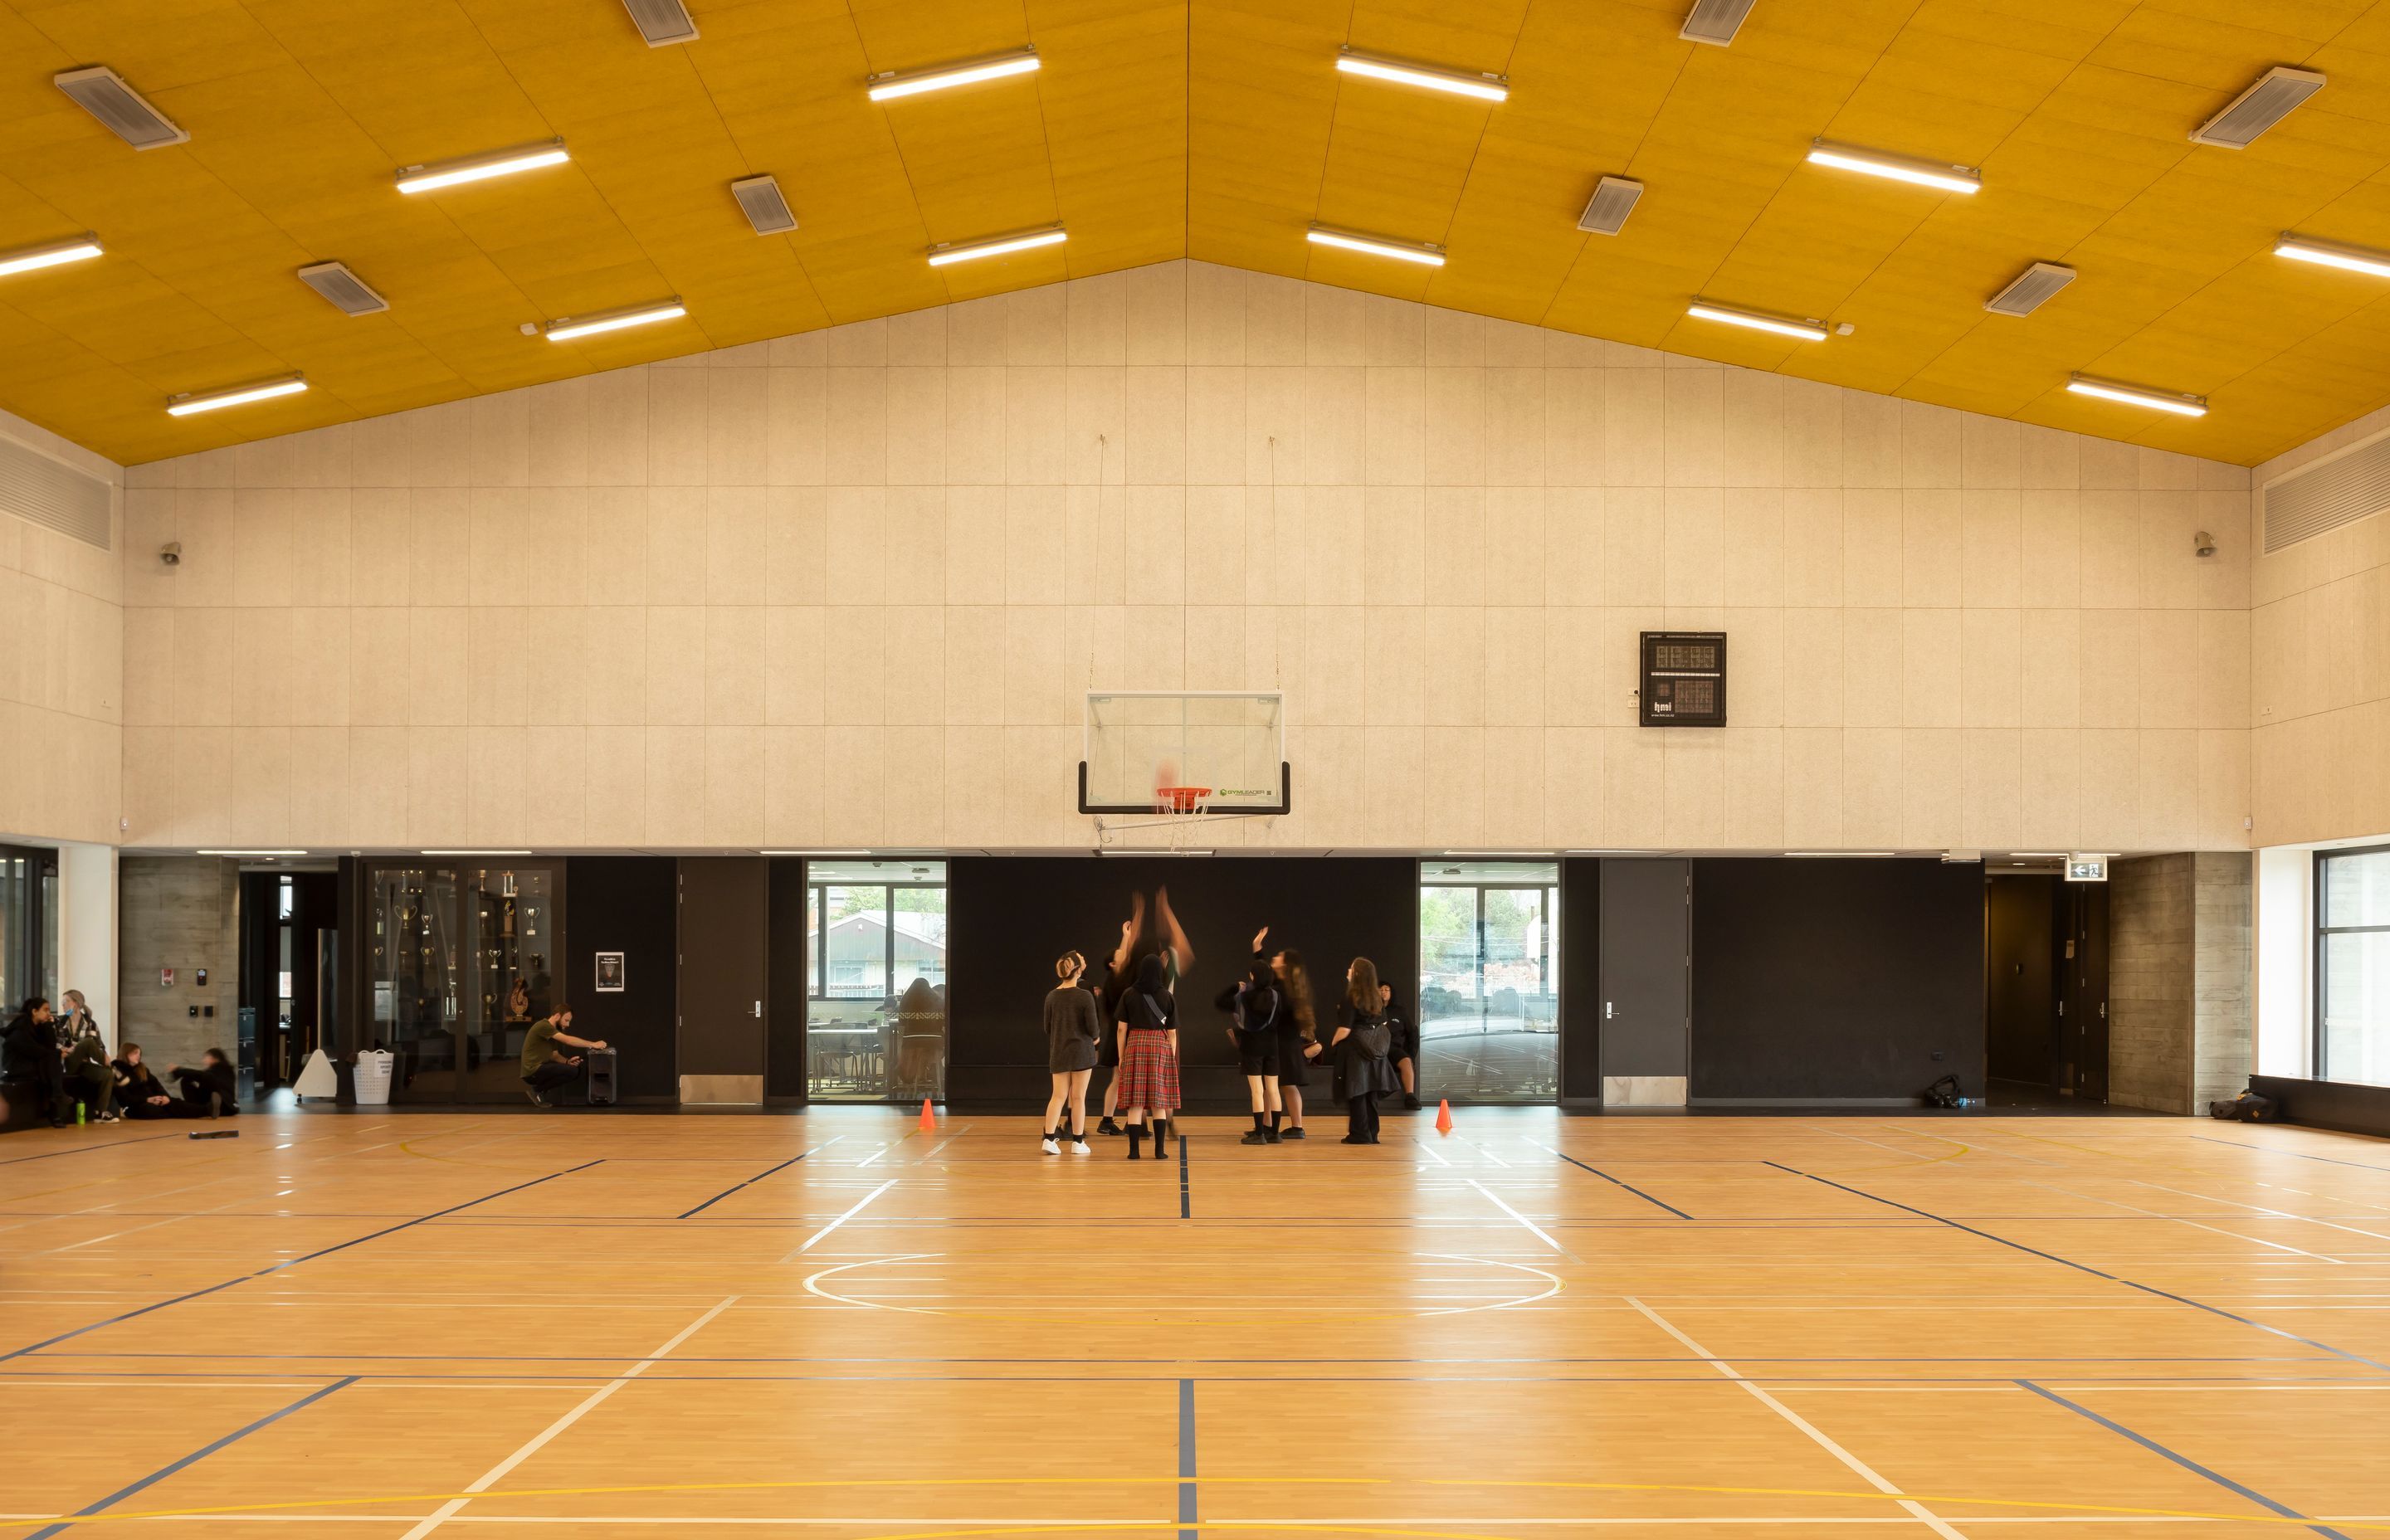  The gymnasium features yellow AUTEX acoustic panelling on the ceiling, which helps reduce noise.